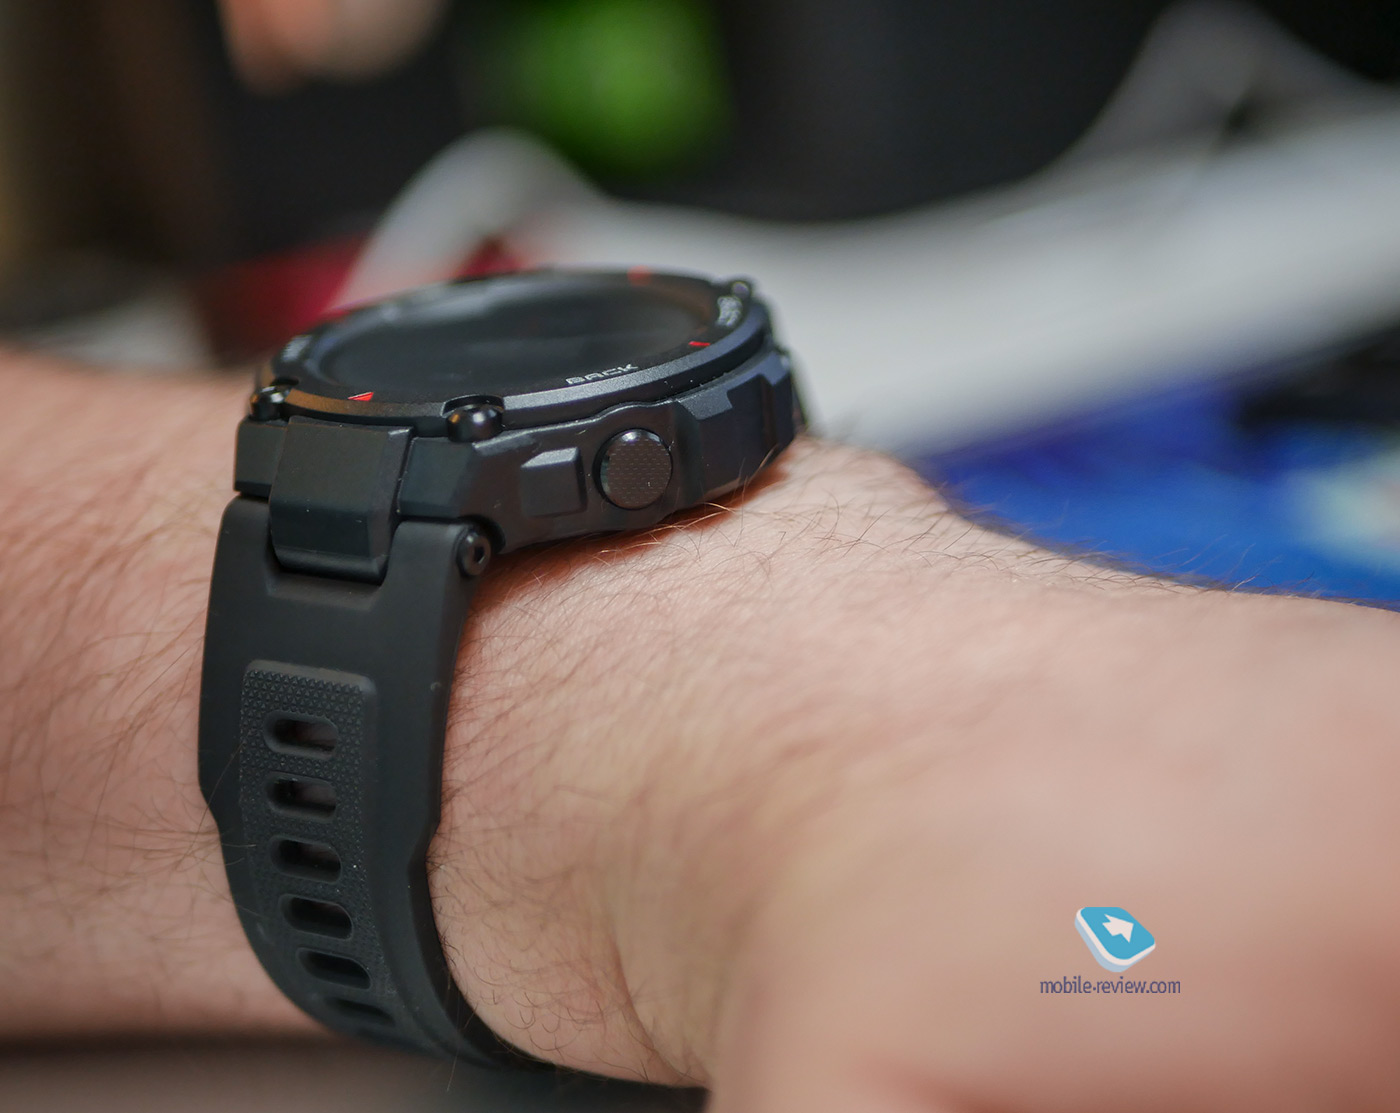 Review of the fitness watch Amazfit T-Rex